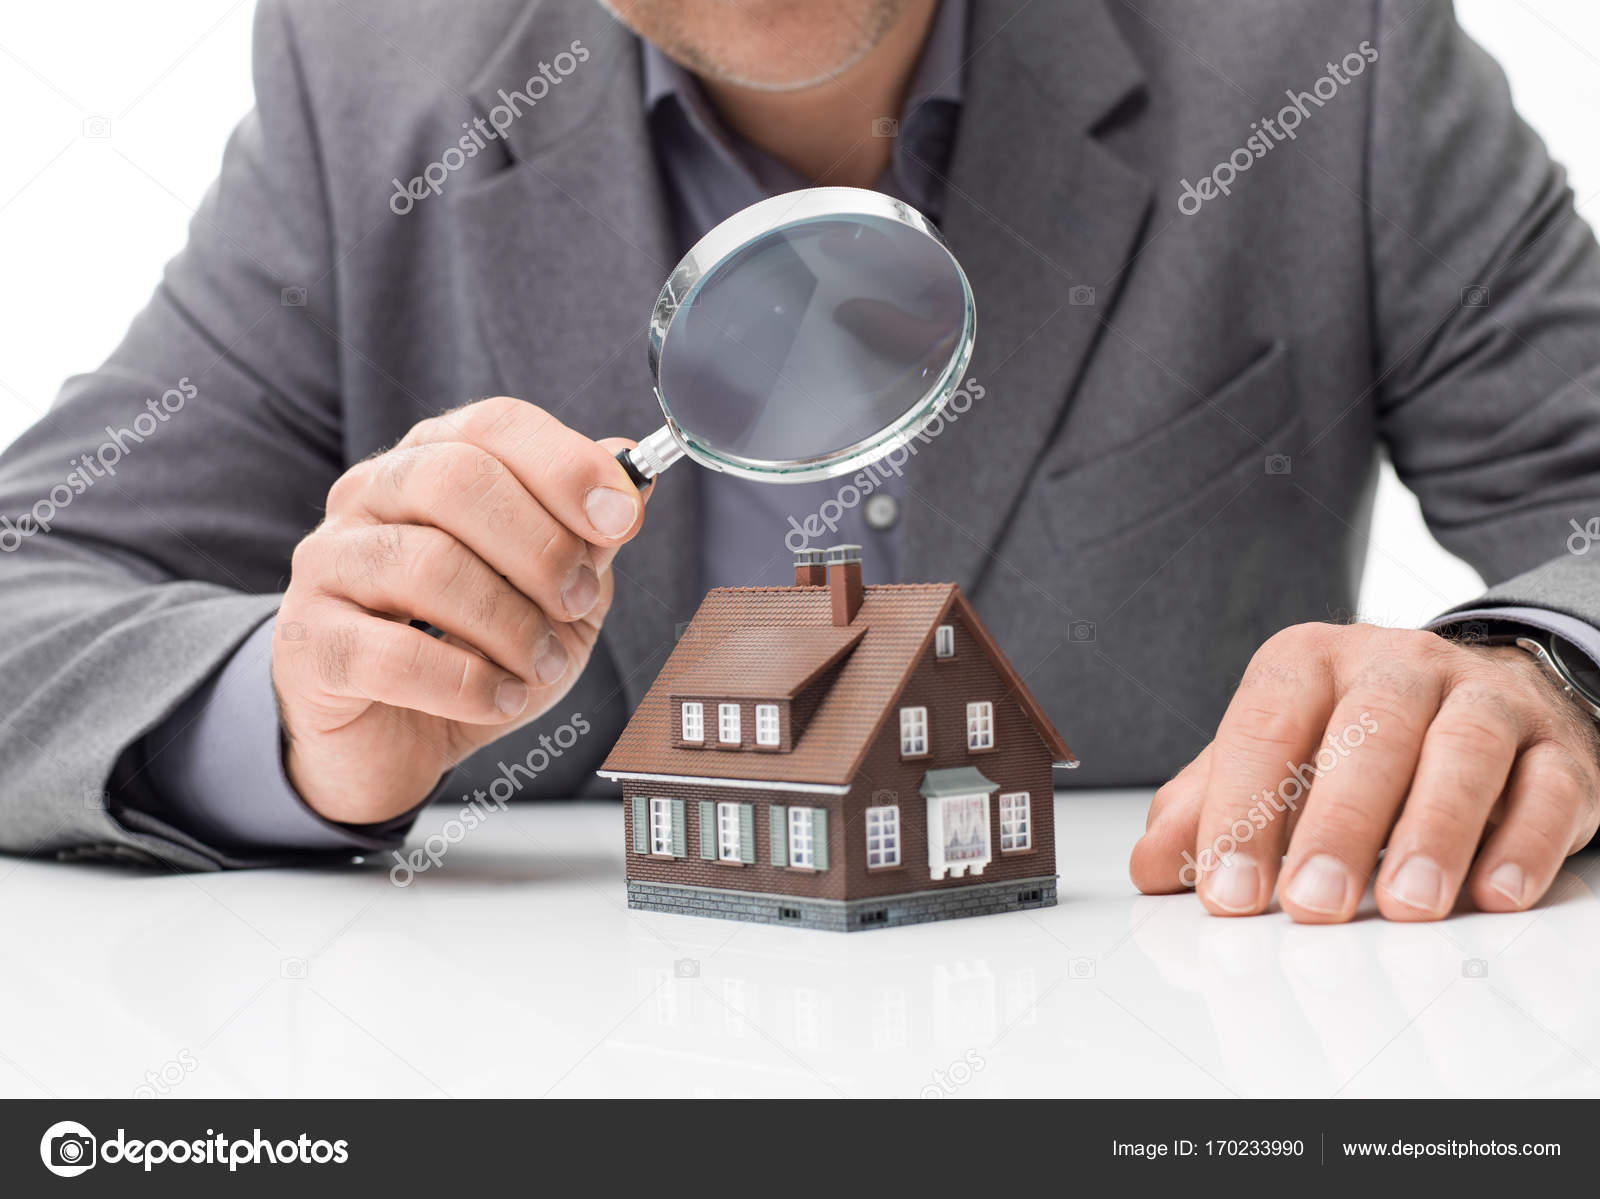 Property inspection Stock Photos, Royalty Free Property inspection Images | Depositphotos